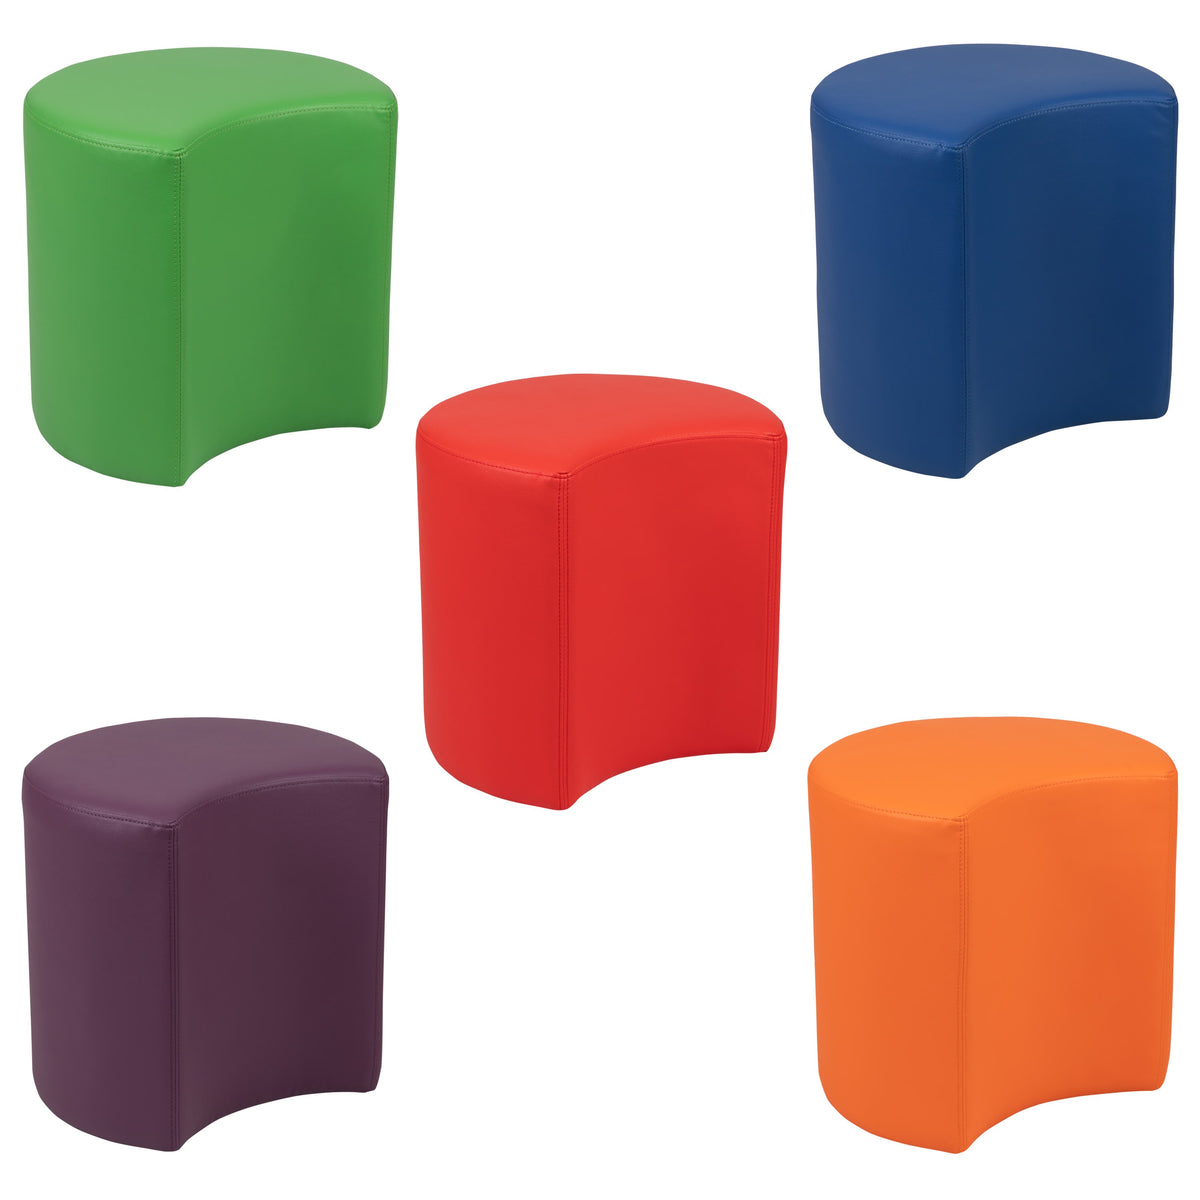 Soft Seating Flexible Flower Set for Classrooms - Assorted (18inchH)